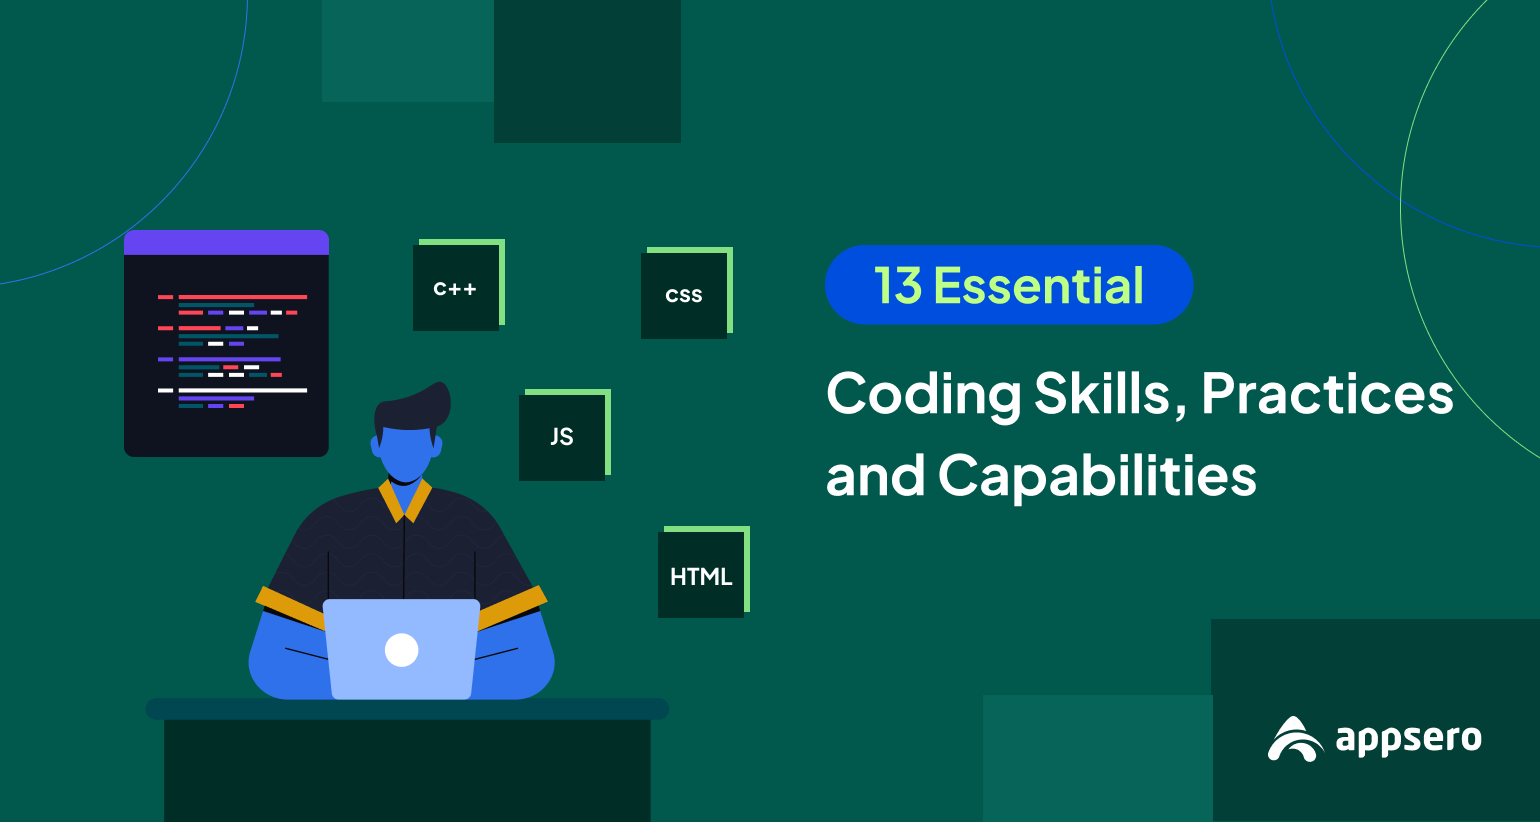 13 Skills for Coding, Practices and Capabilities